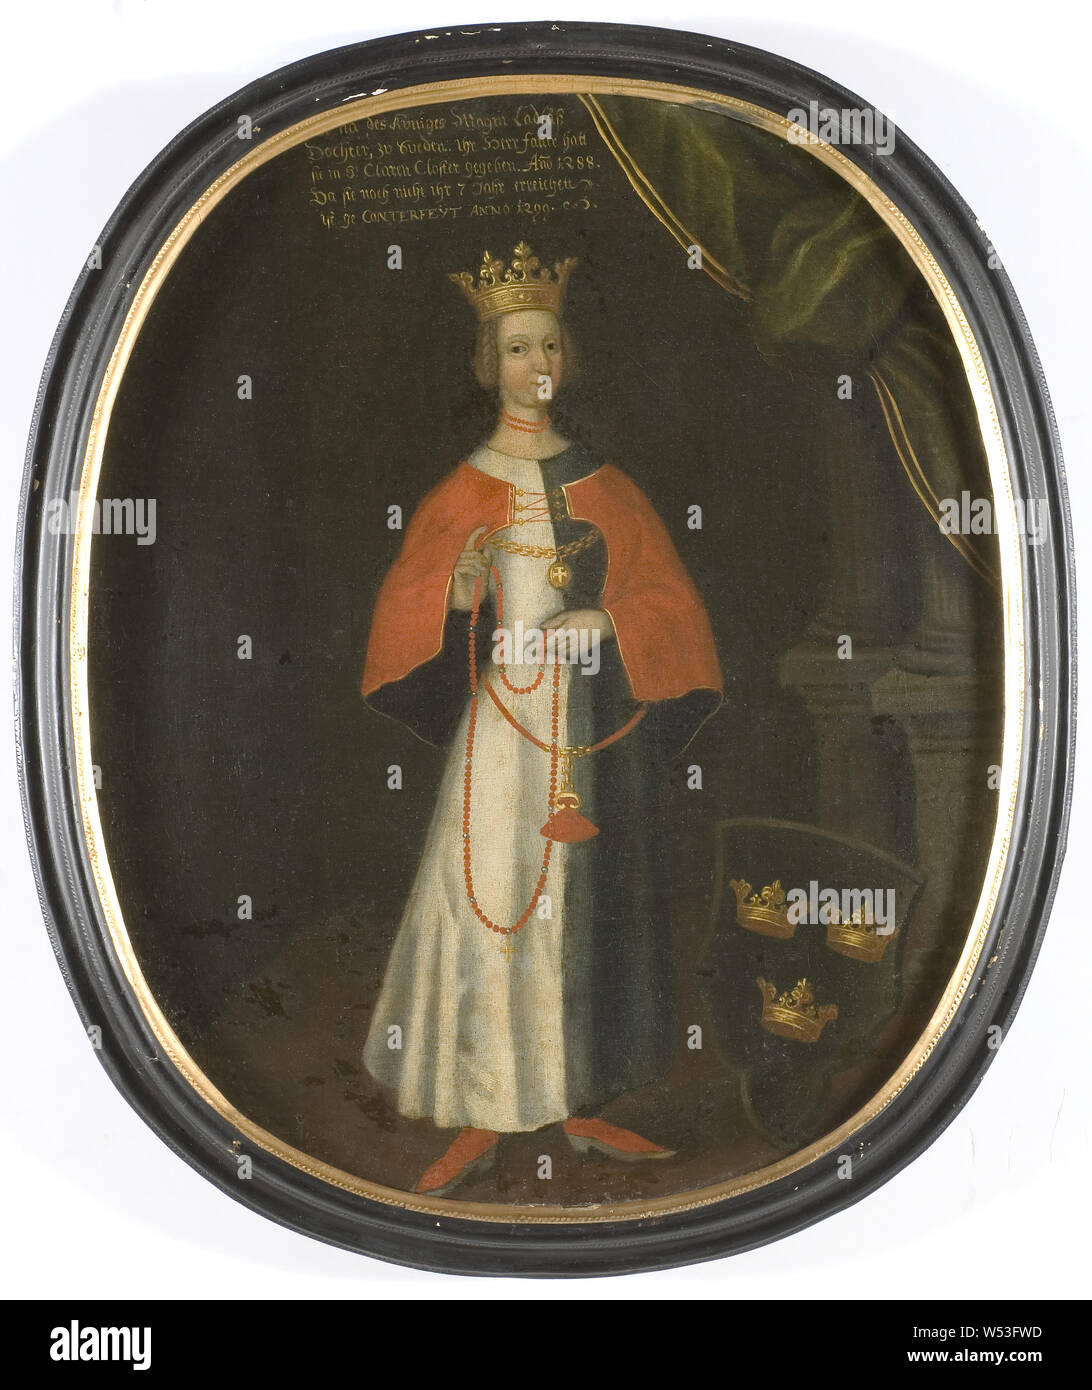 Queen Helvig, Helvig queen of Sweden princess of Holstein, painting, Hedwig of Holstein, oil on canvas, Height, 57 cm (22.4 inches), Width, 48 cm (18.8 inches) Stock Photo